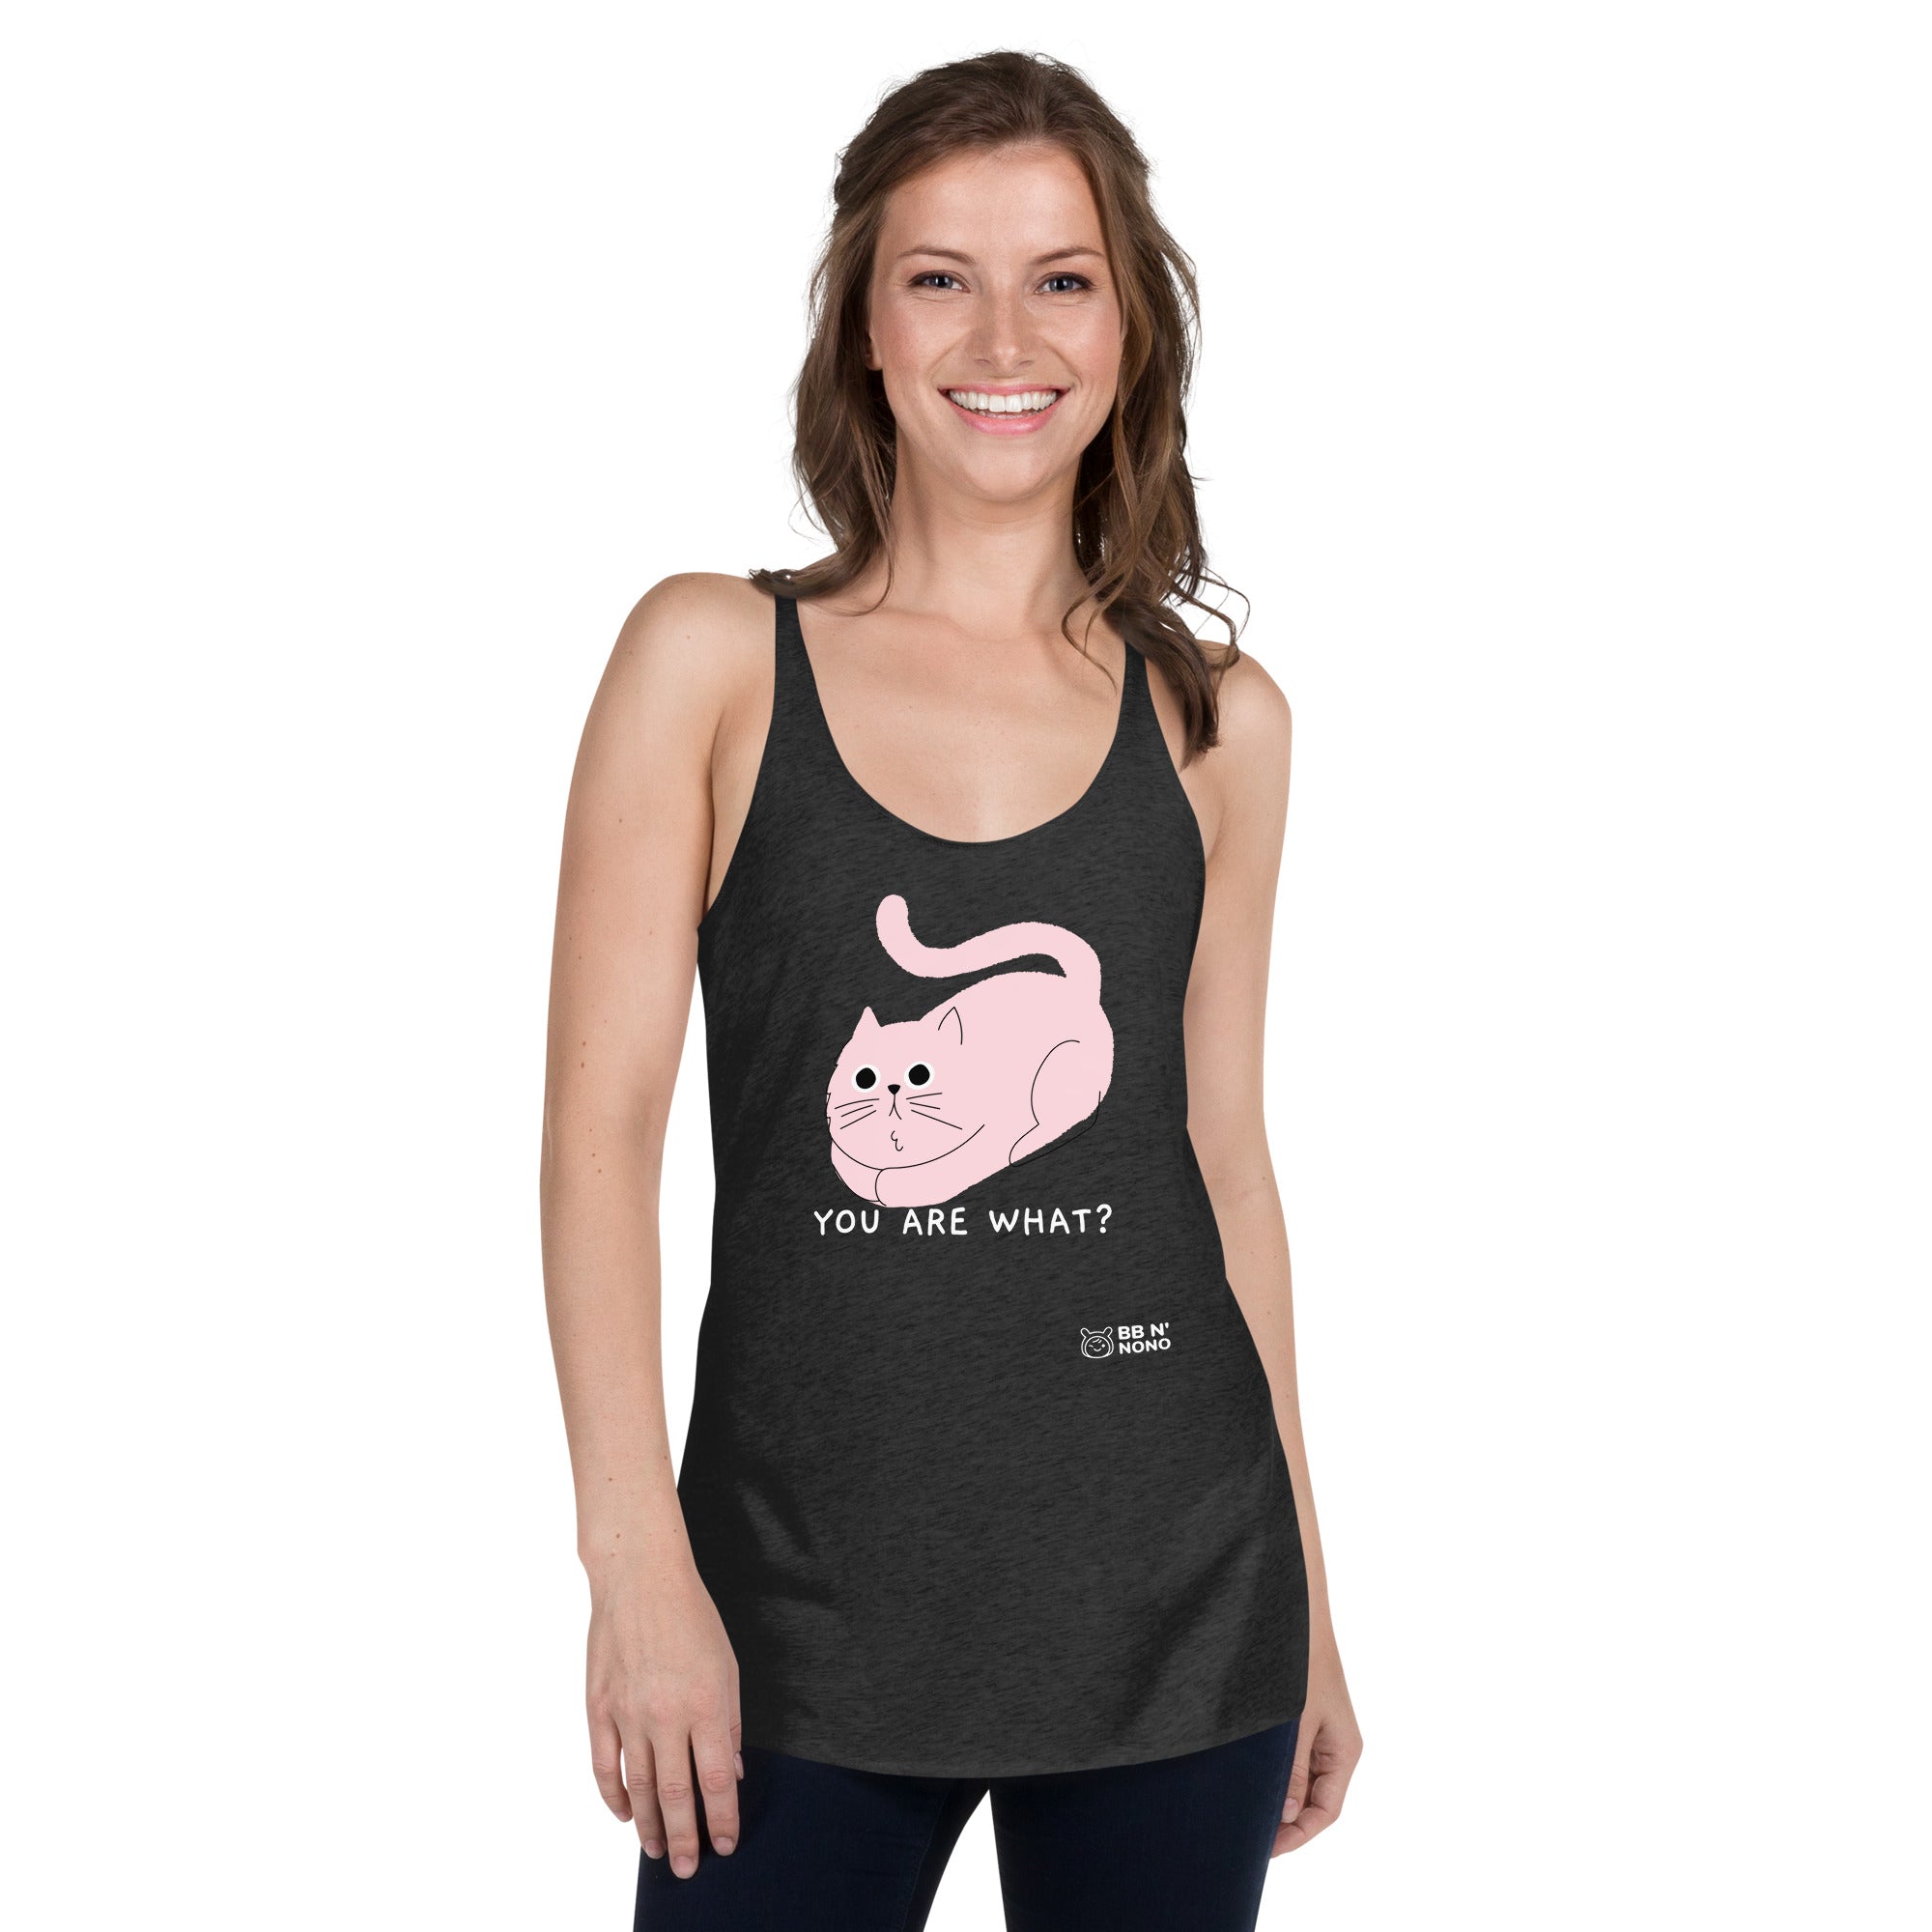 You are what? - Women's Racerback Tank